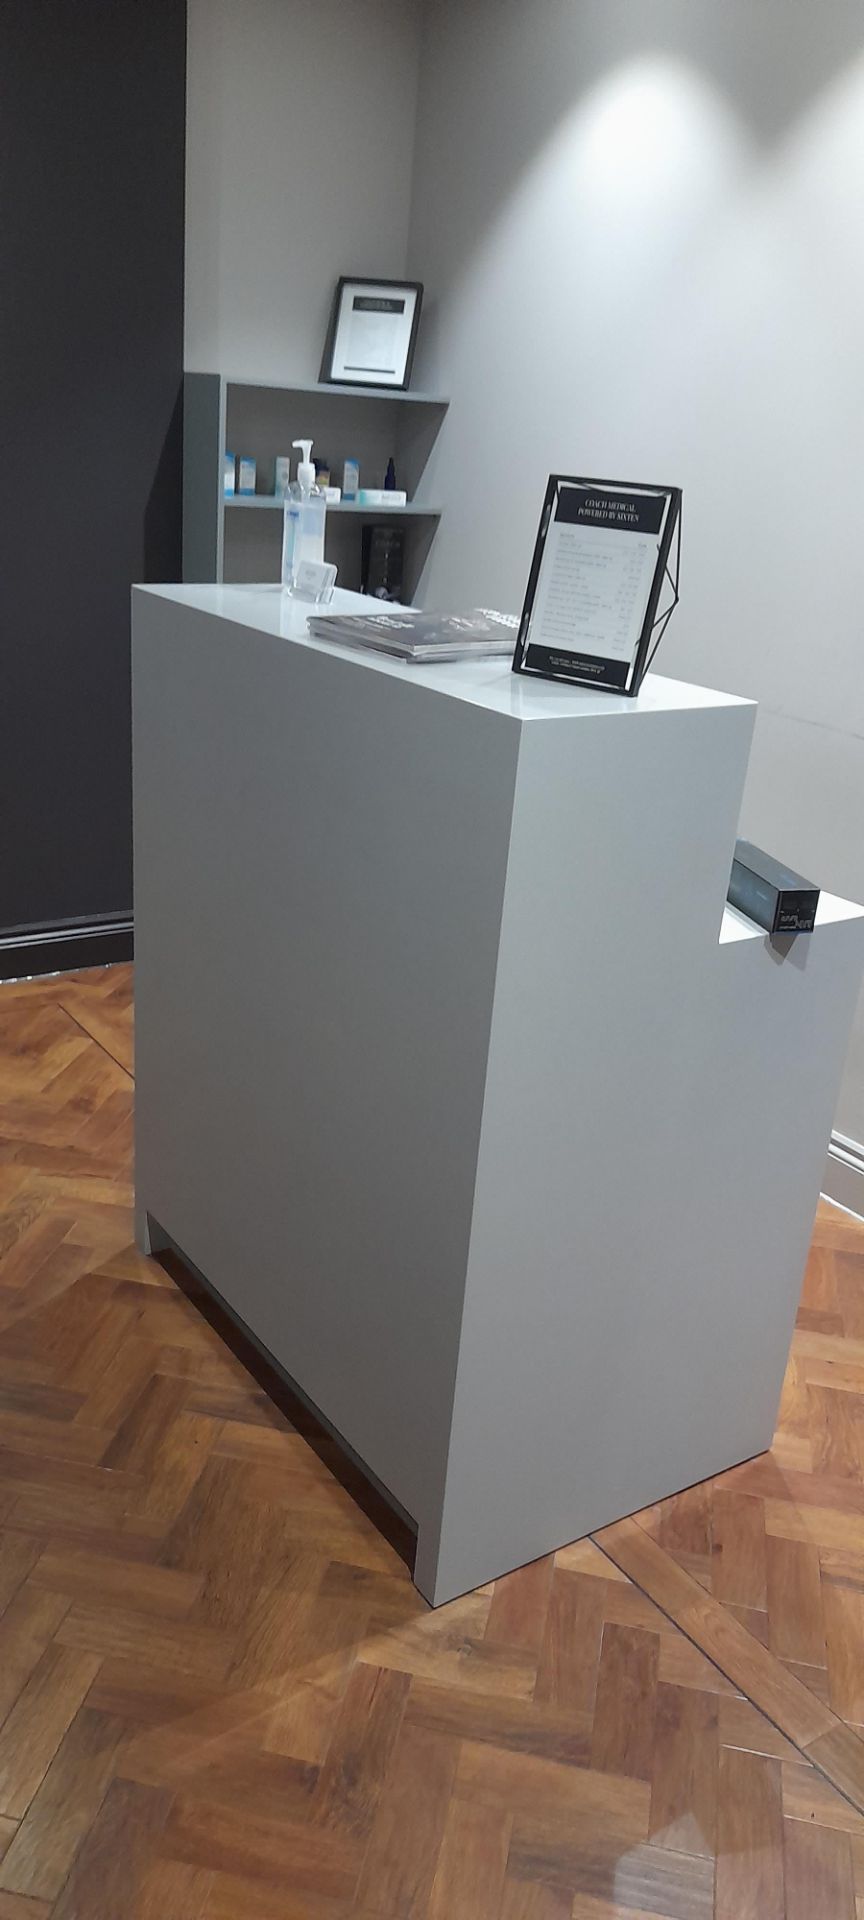 Freestanding reception desk with cupboard under, approx. 1m wide. Contents excluded